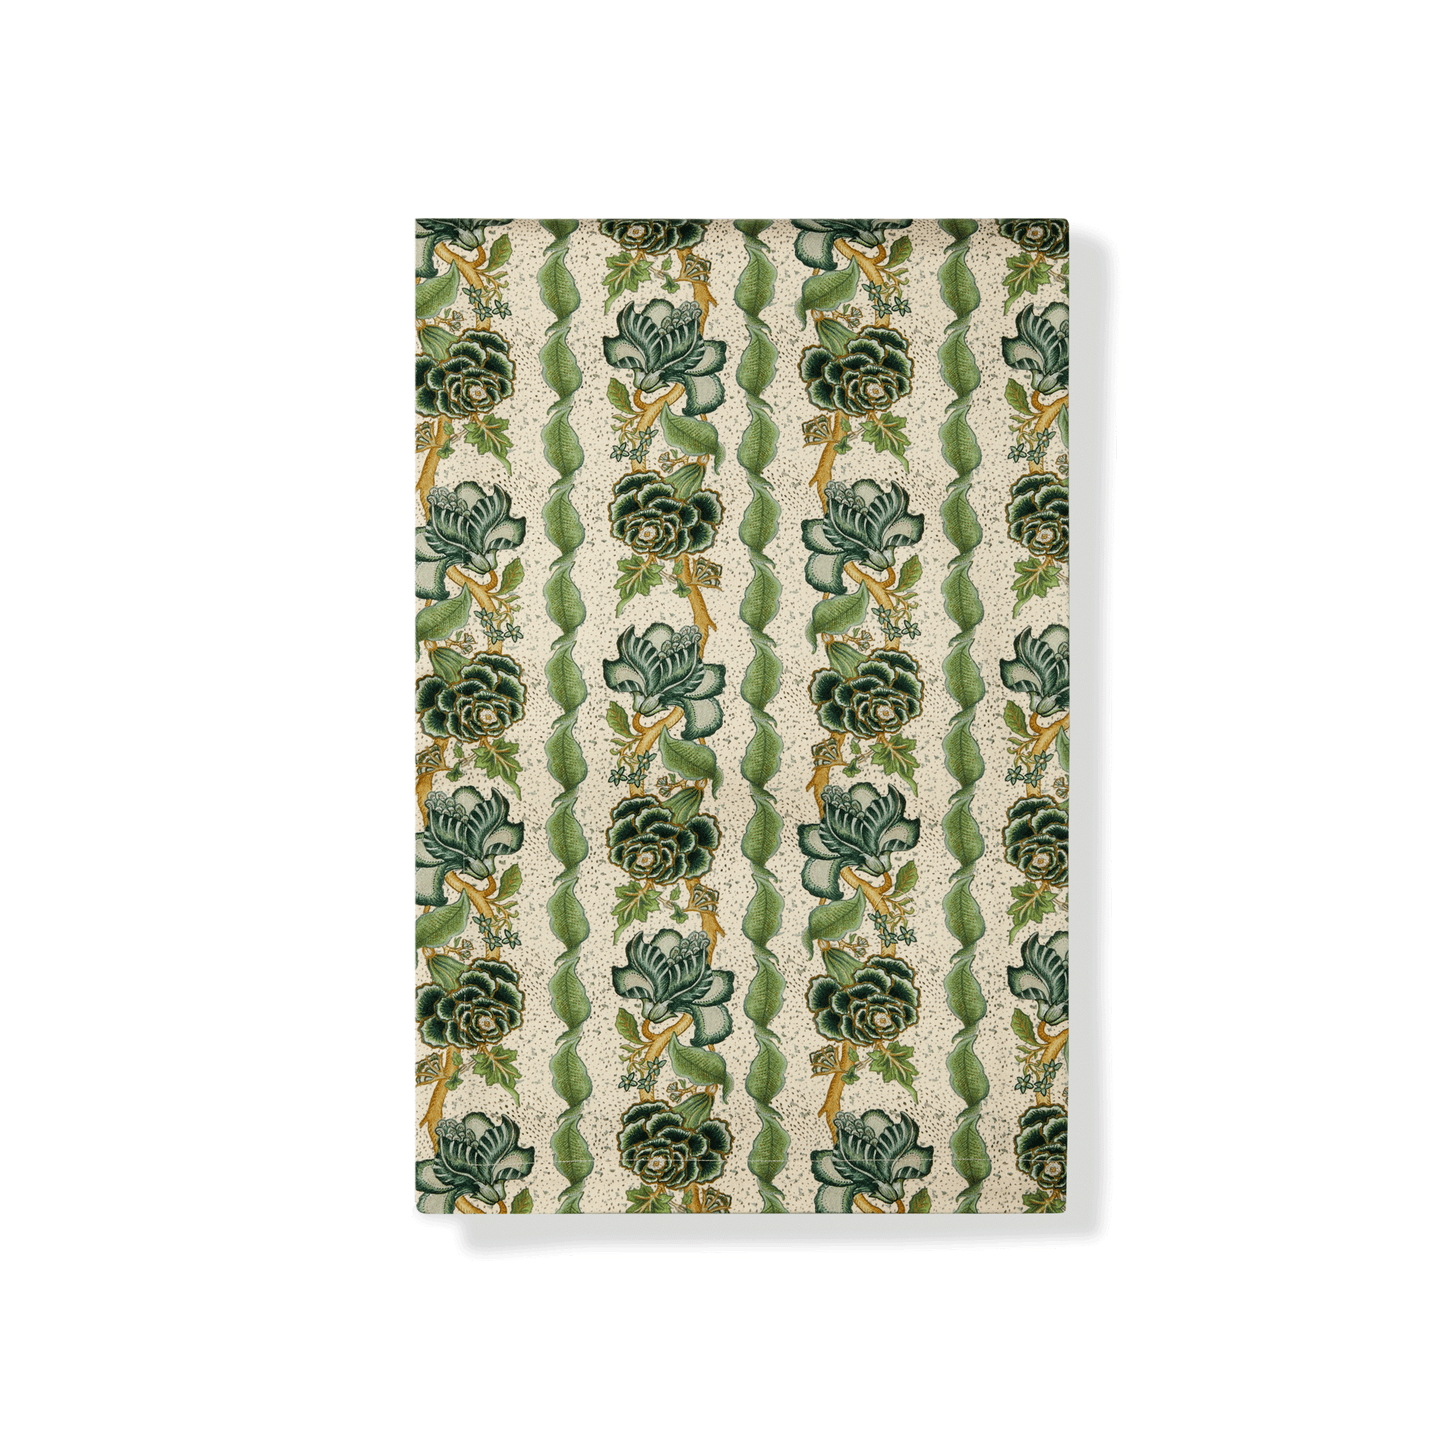 Rectangular Tablecloth in Jardin Green Floral Cotton